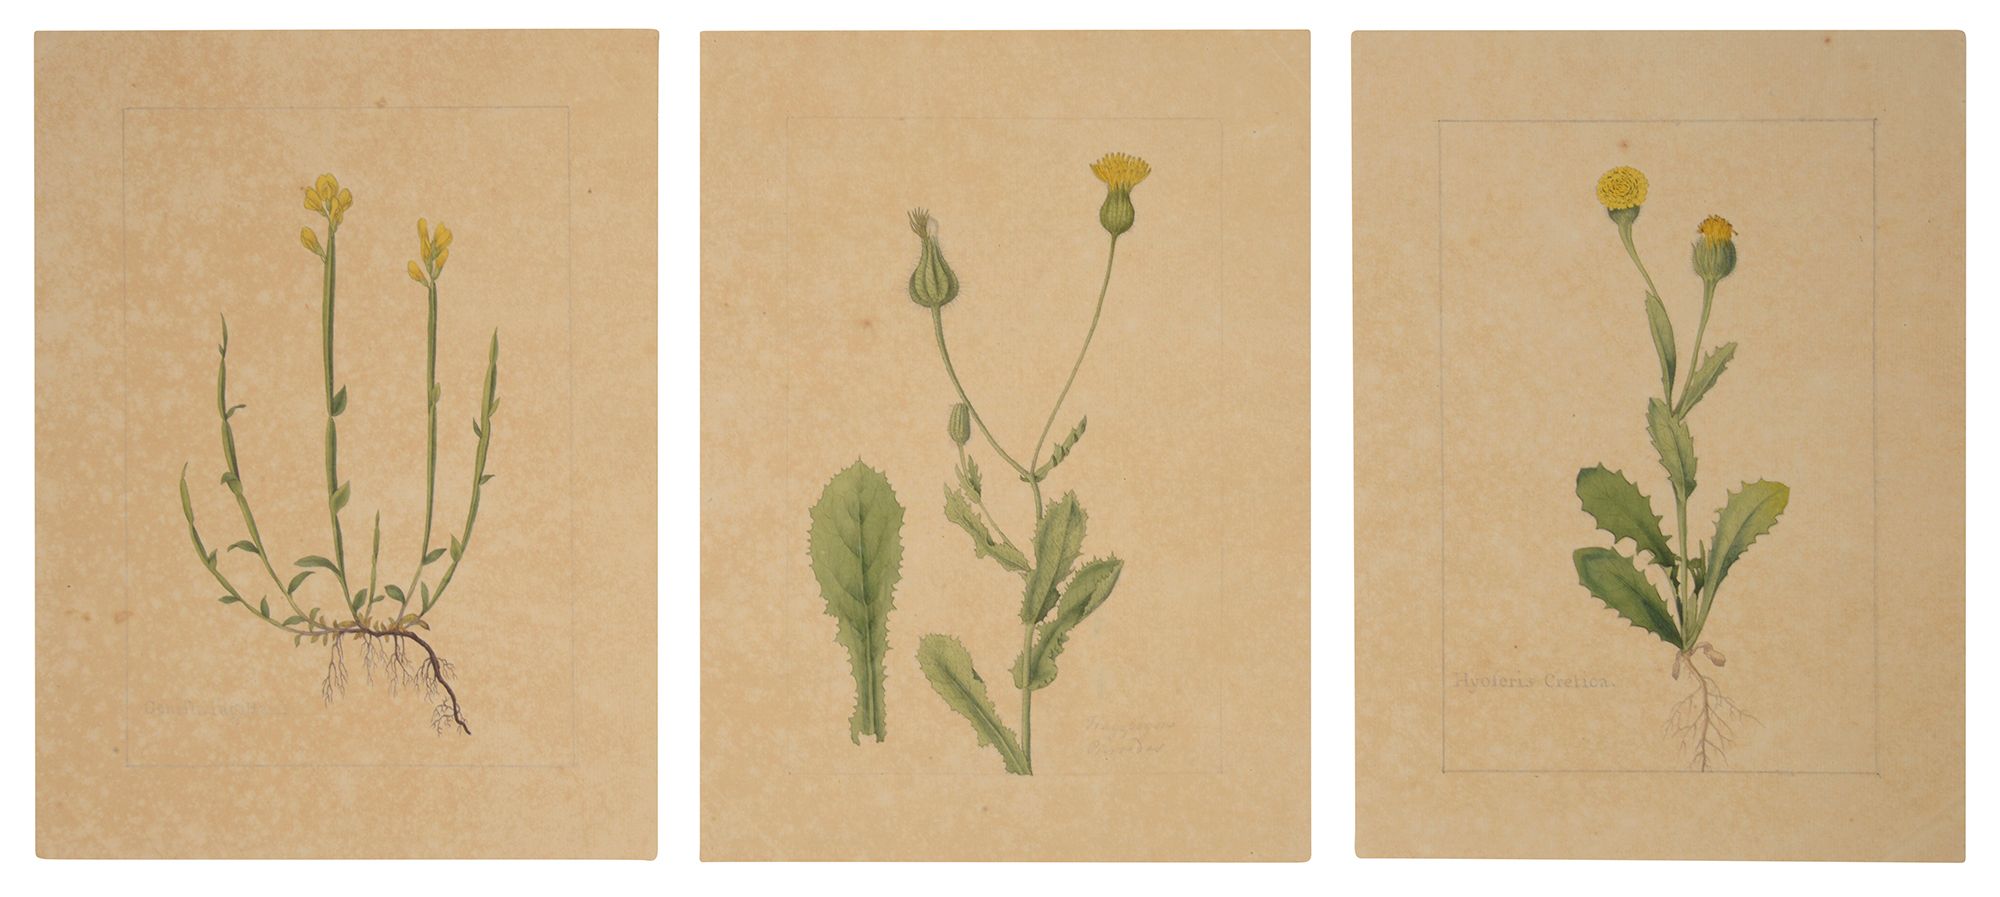 Three botanical studies of yellow flowers from the collection of William Curtis (1746-1799)